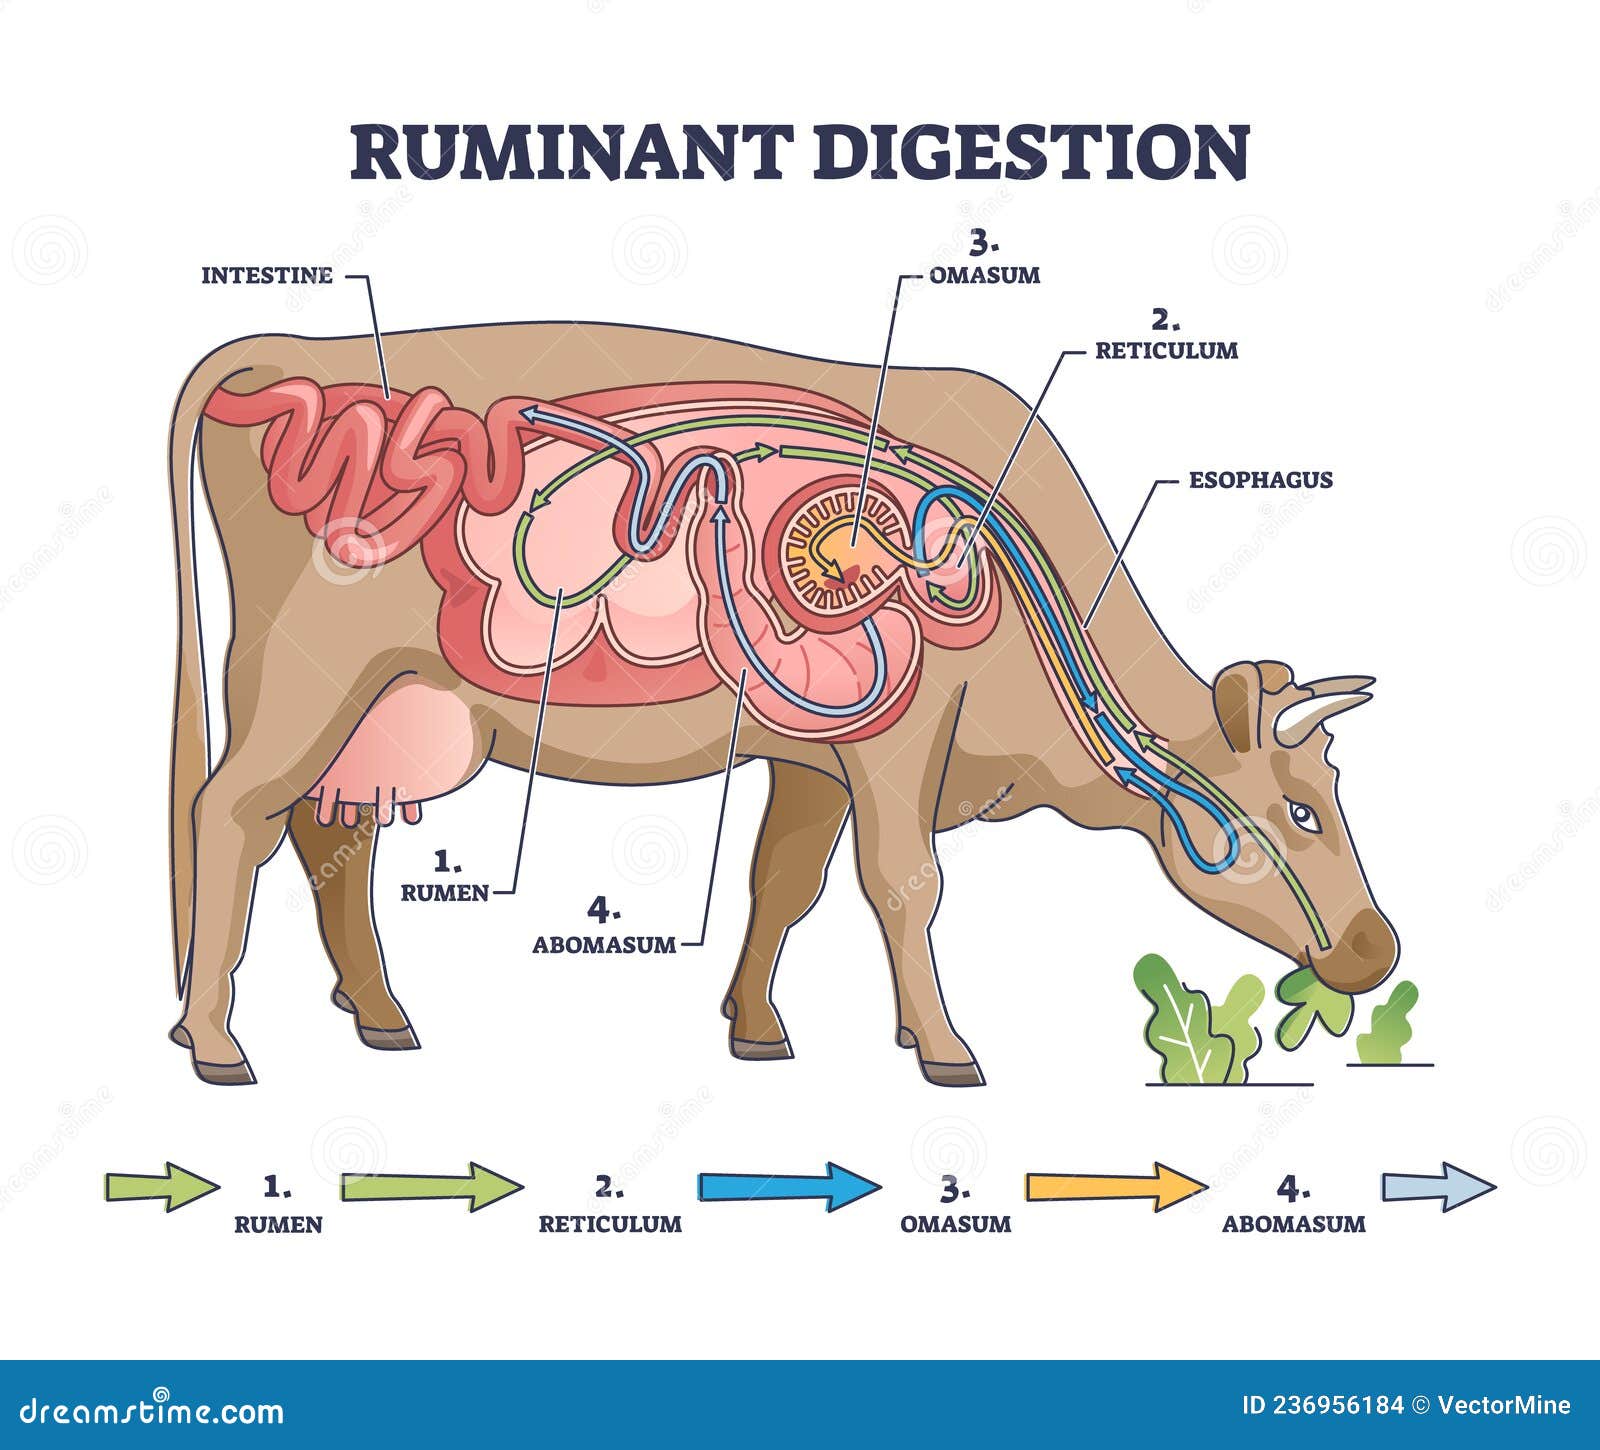 ruminant digestion system with inner digestive structure outline diagram